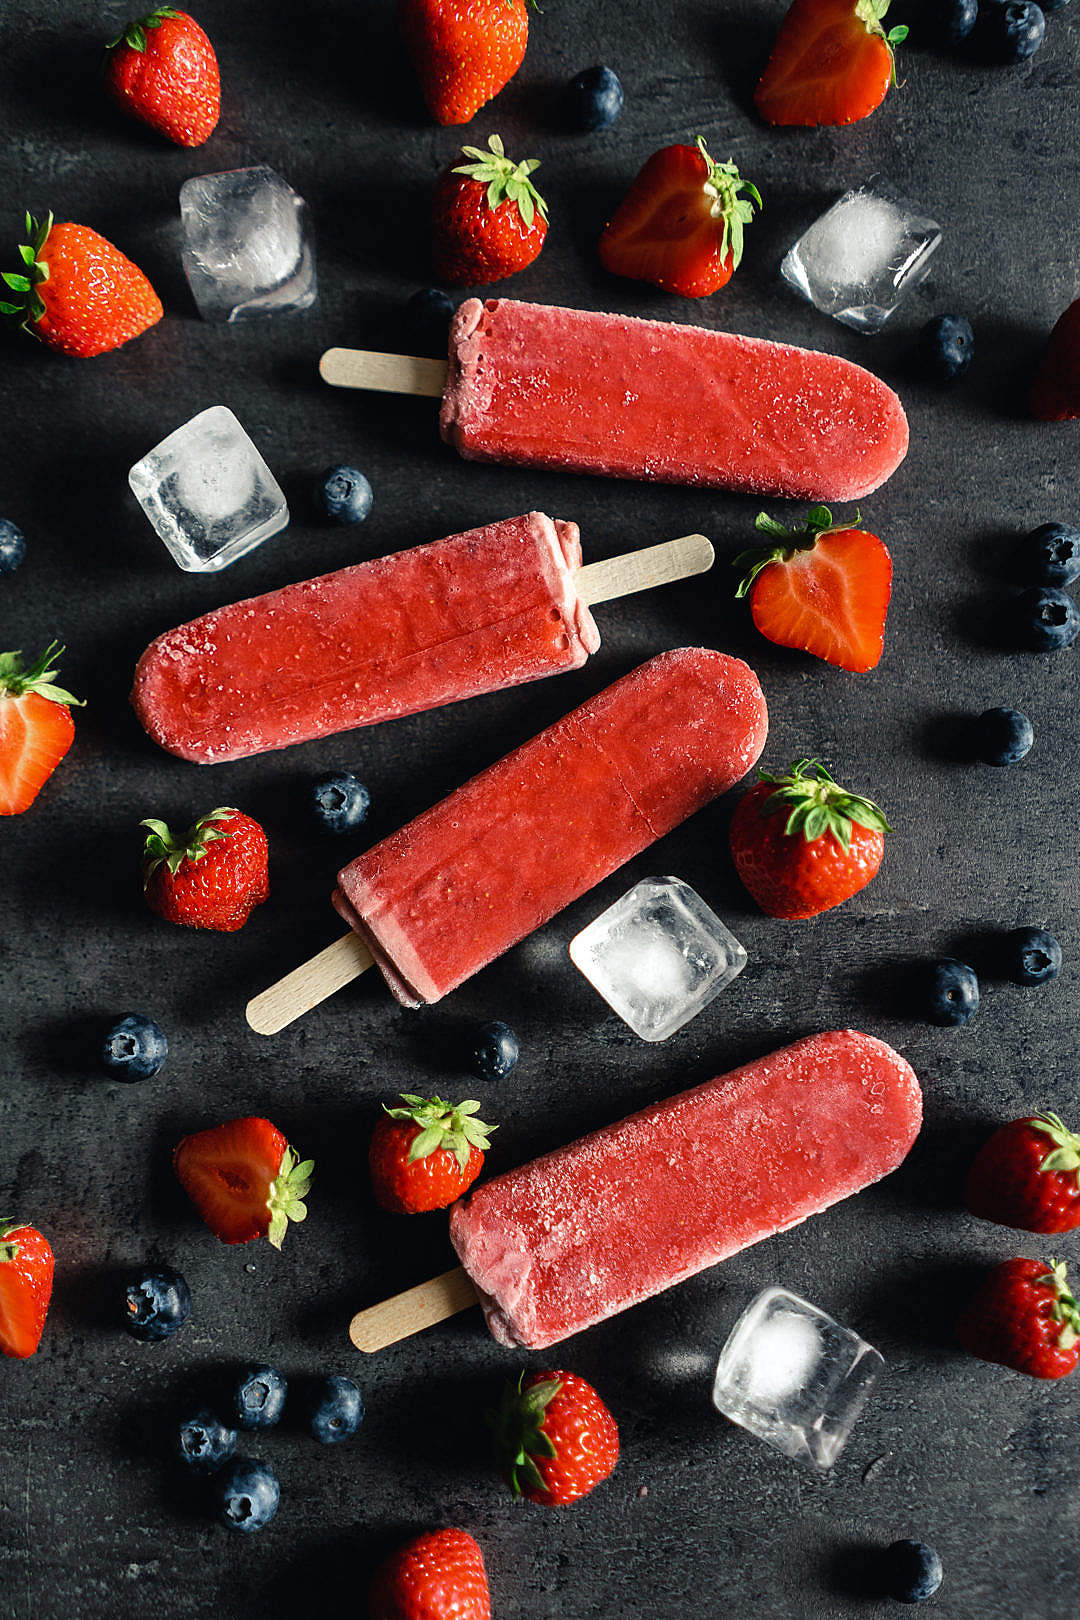 Download Strawberry Ice Lollies with Fresh Blueberries on Black Background FREE Stock Photo